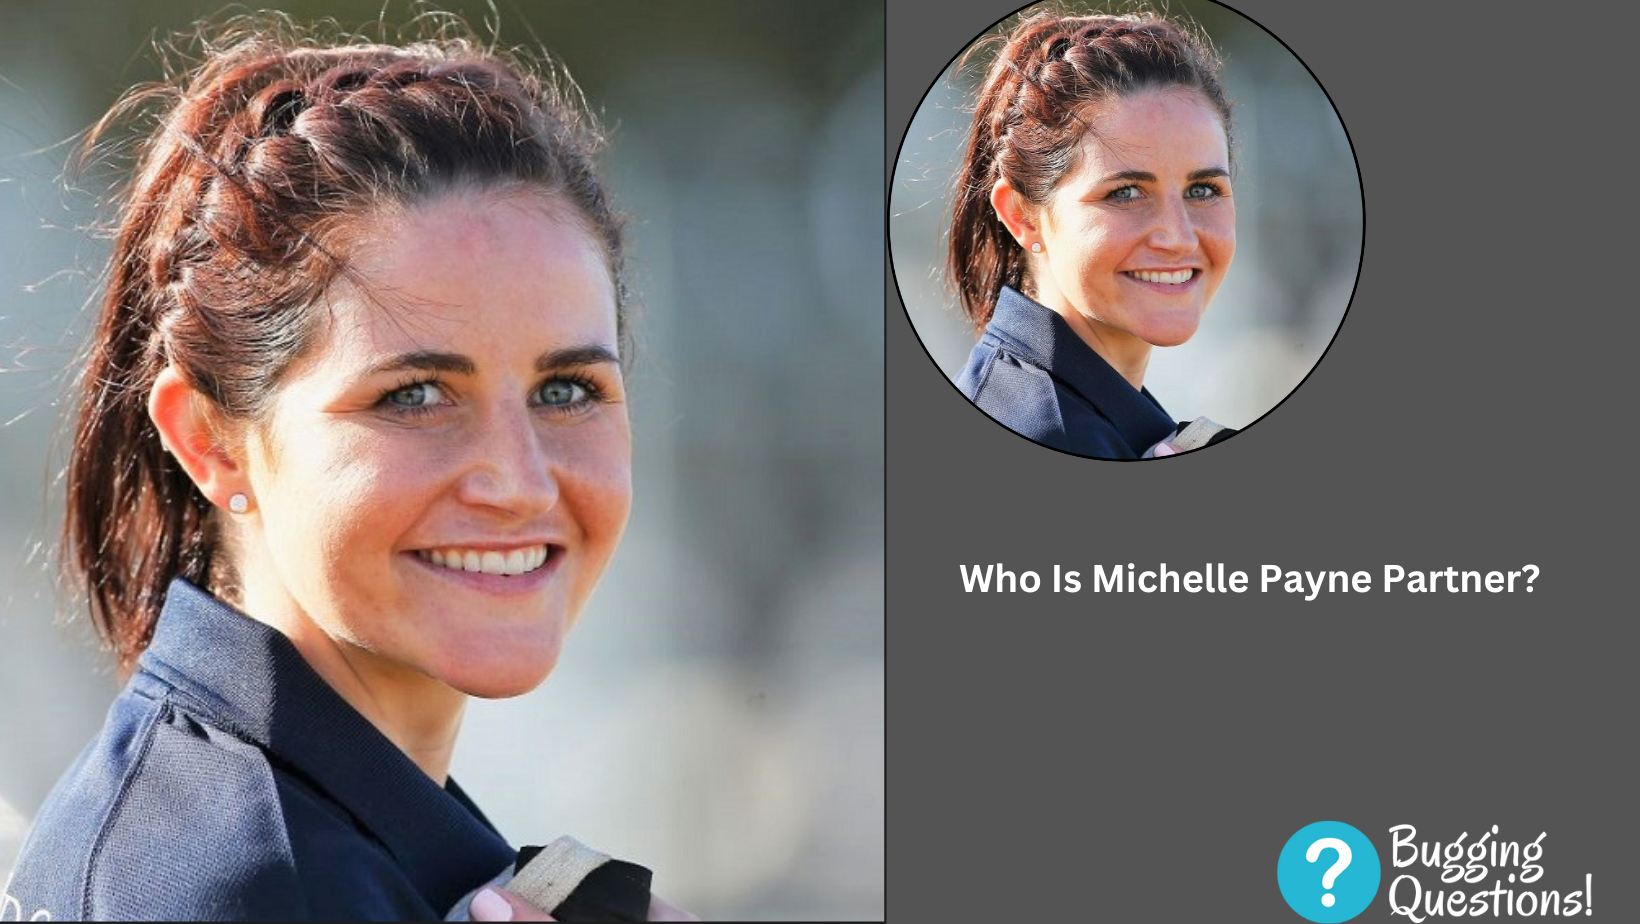 Who Is Michelle Payne Partner?